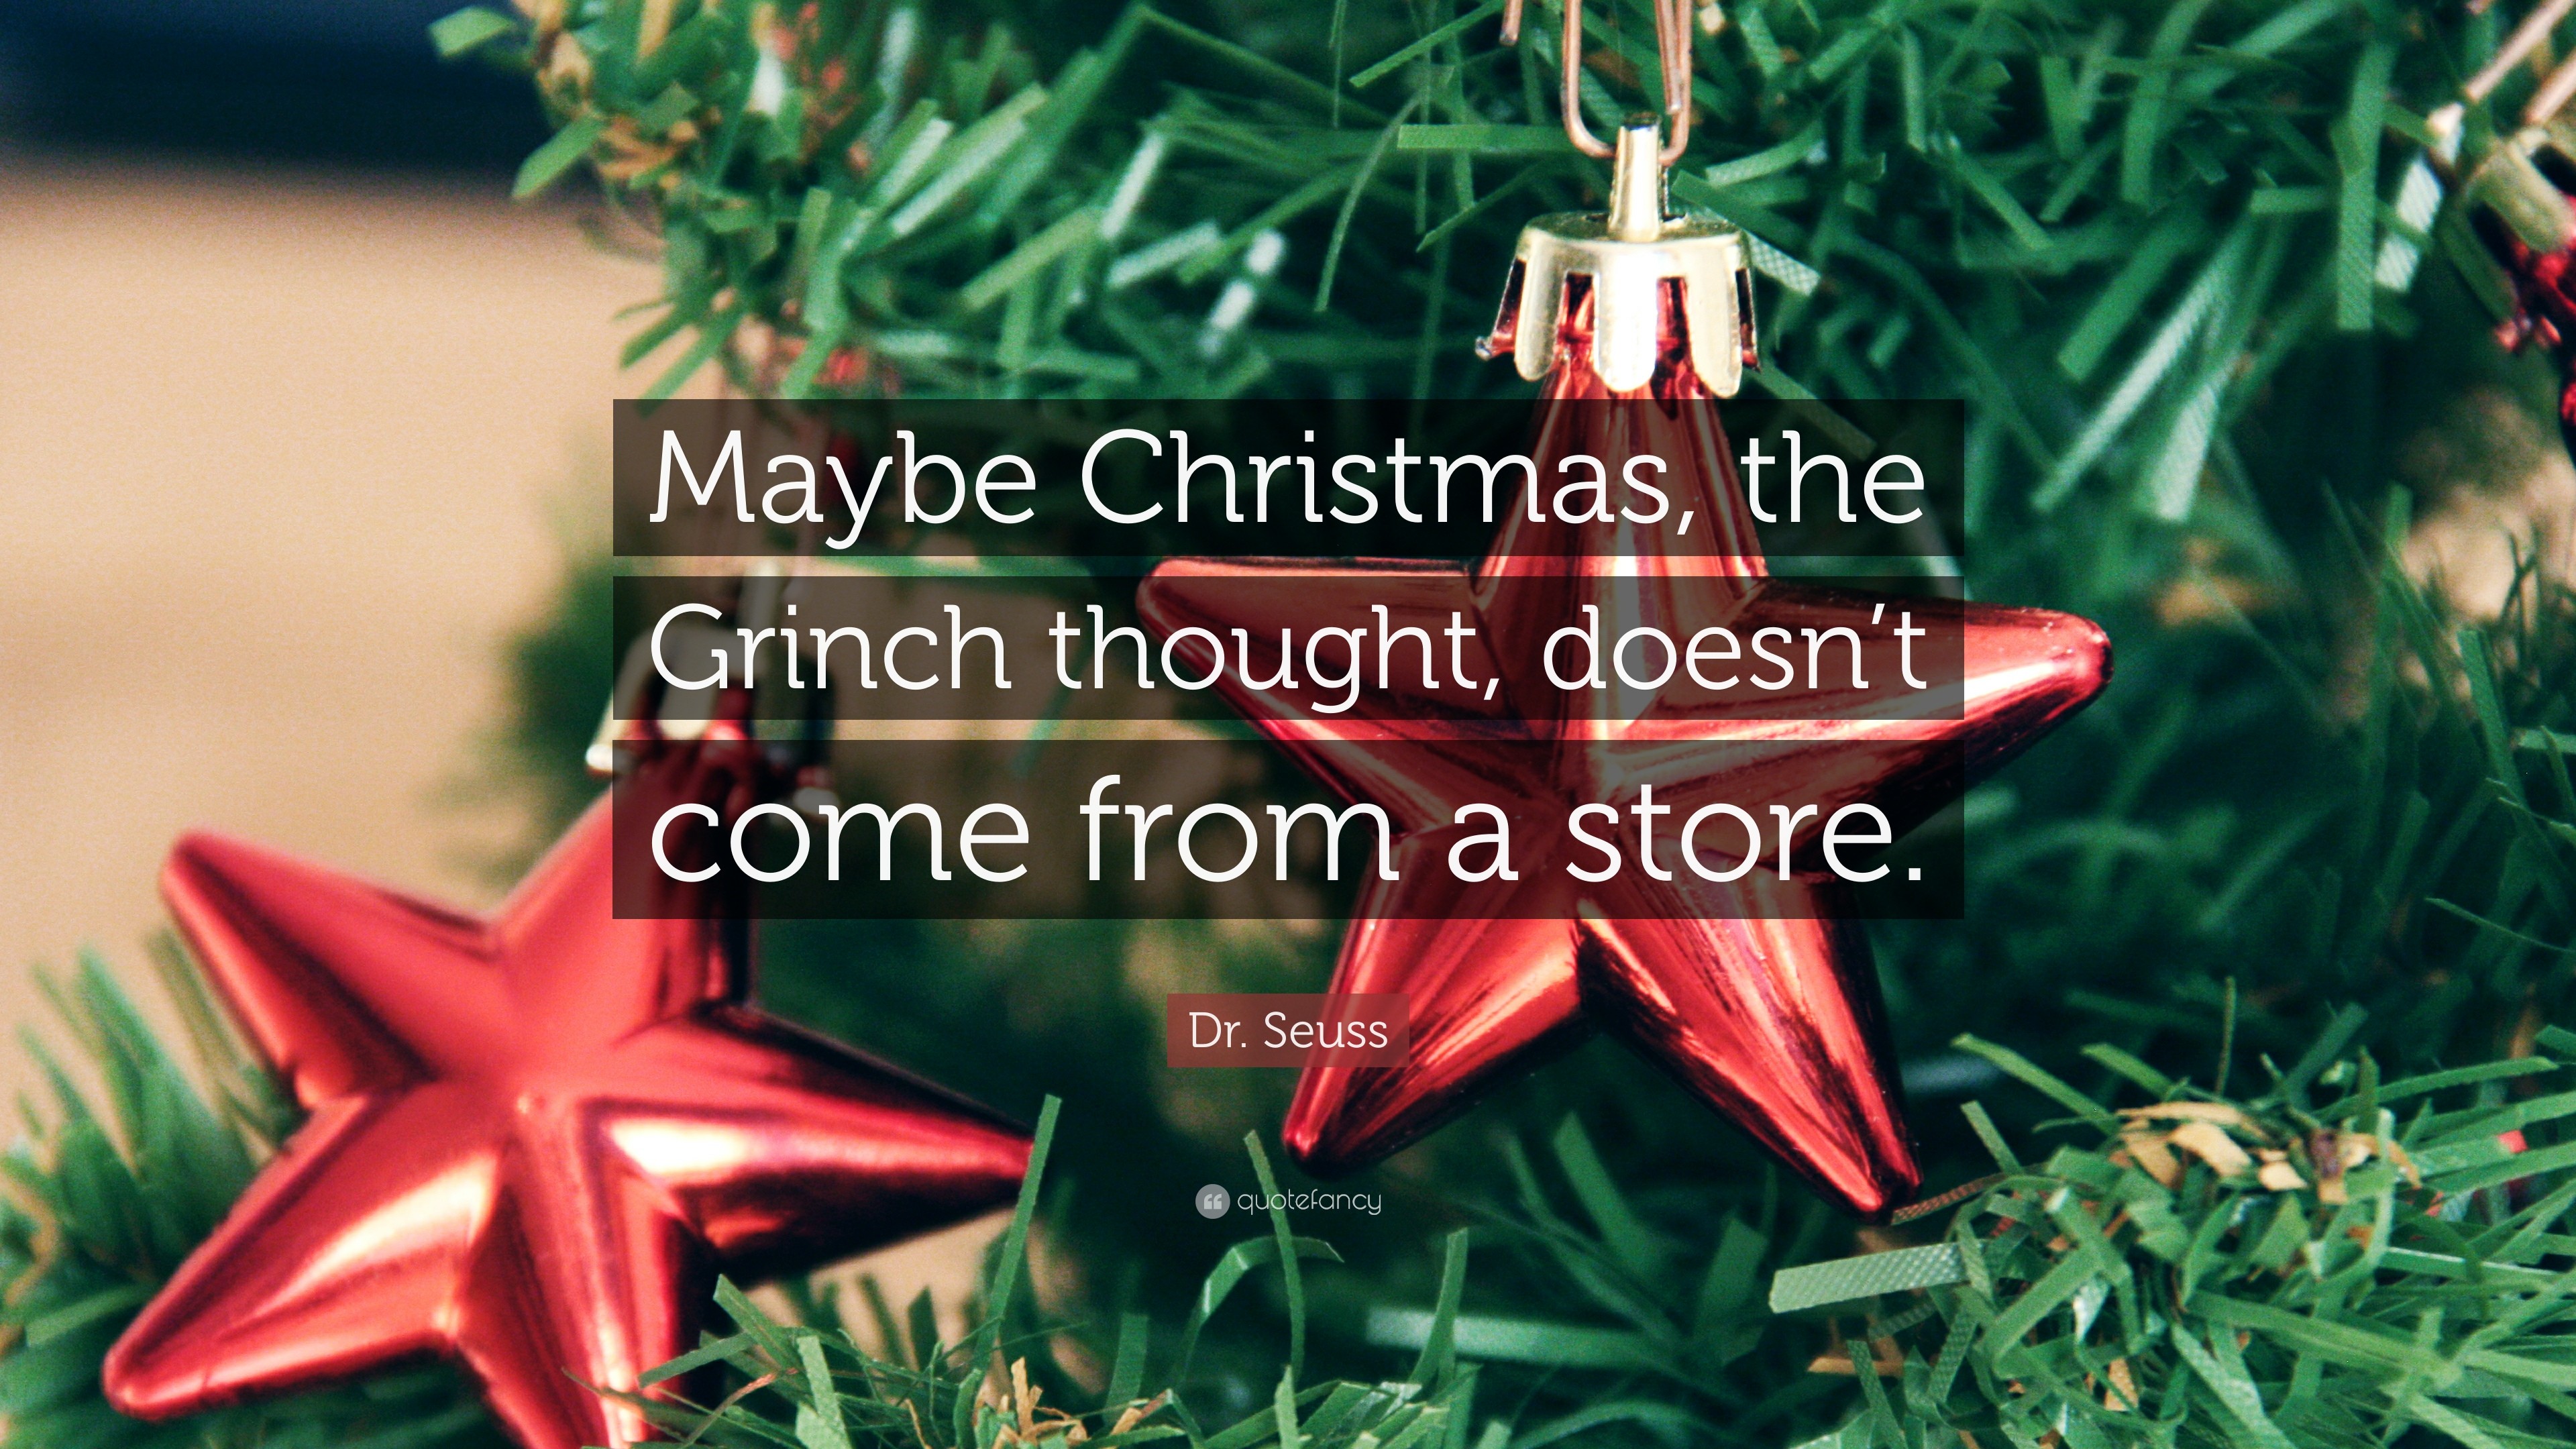 3840x2160 Dr. Seuss Quote: “Maybe Christmas, the Grinch thought, doesn't